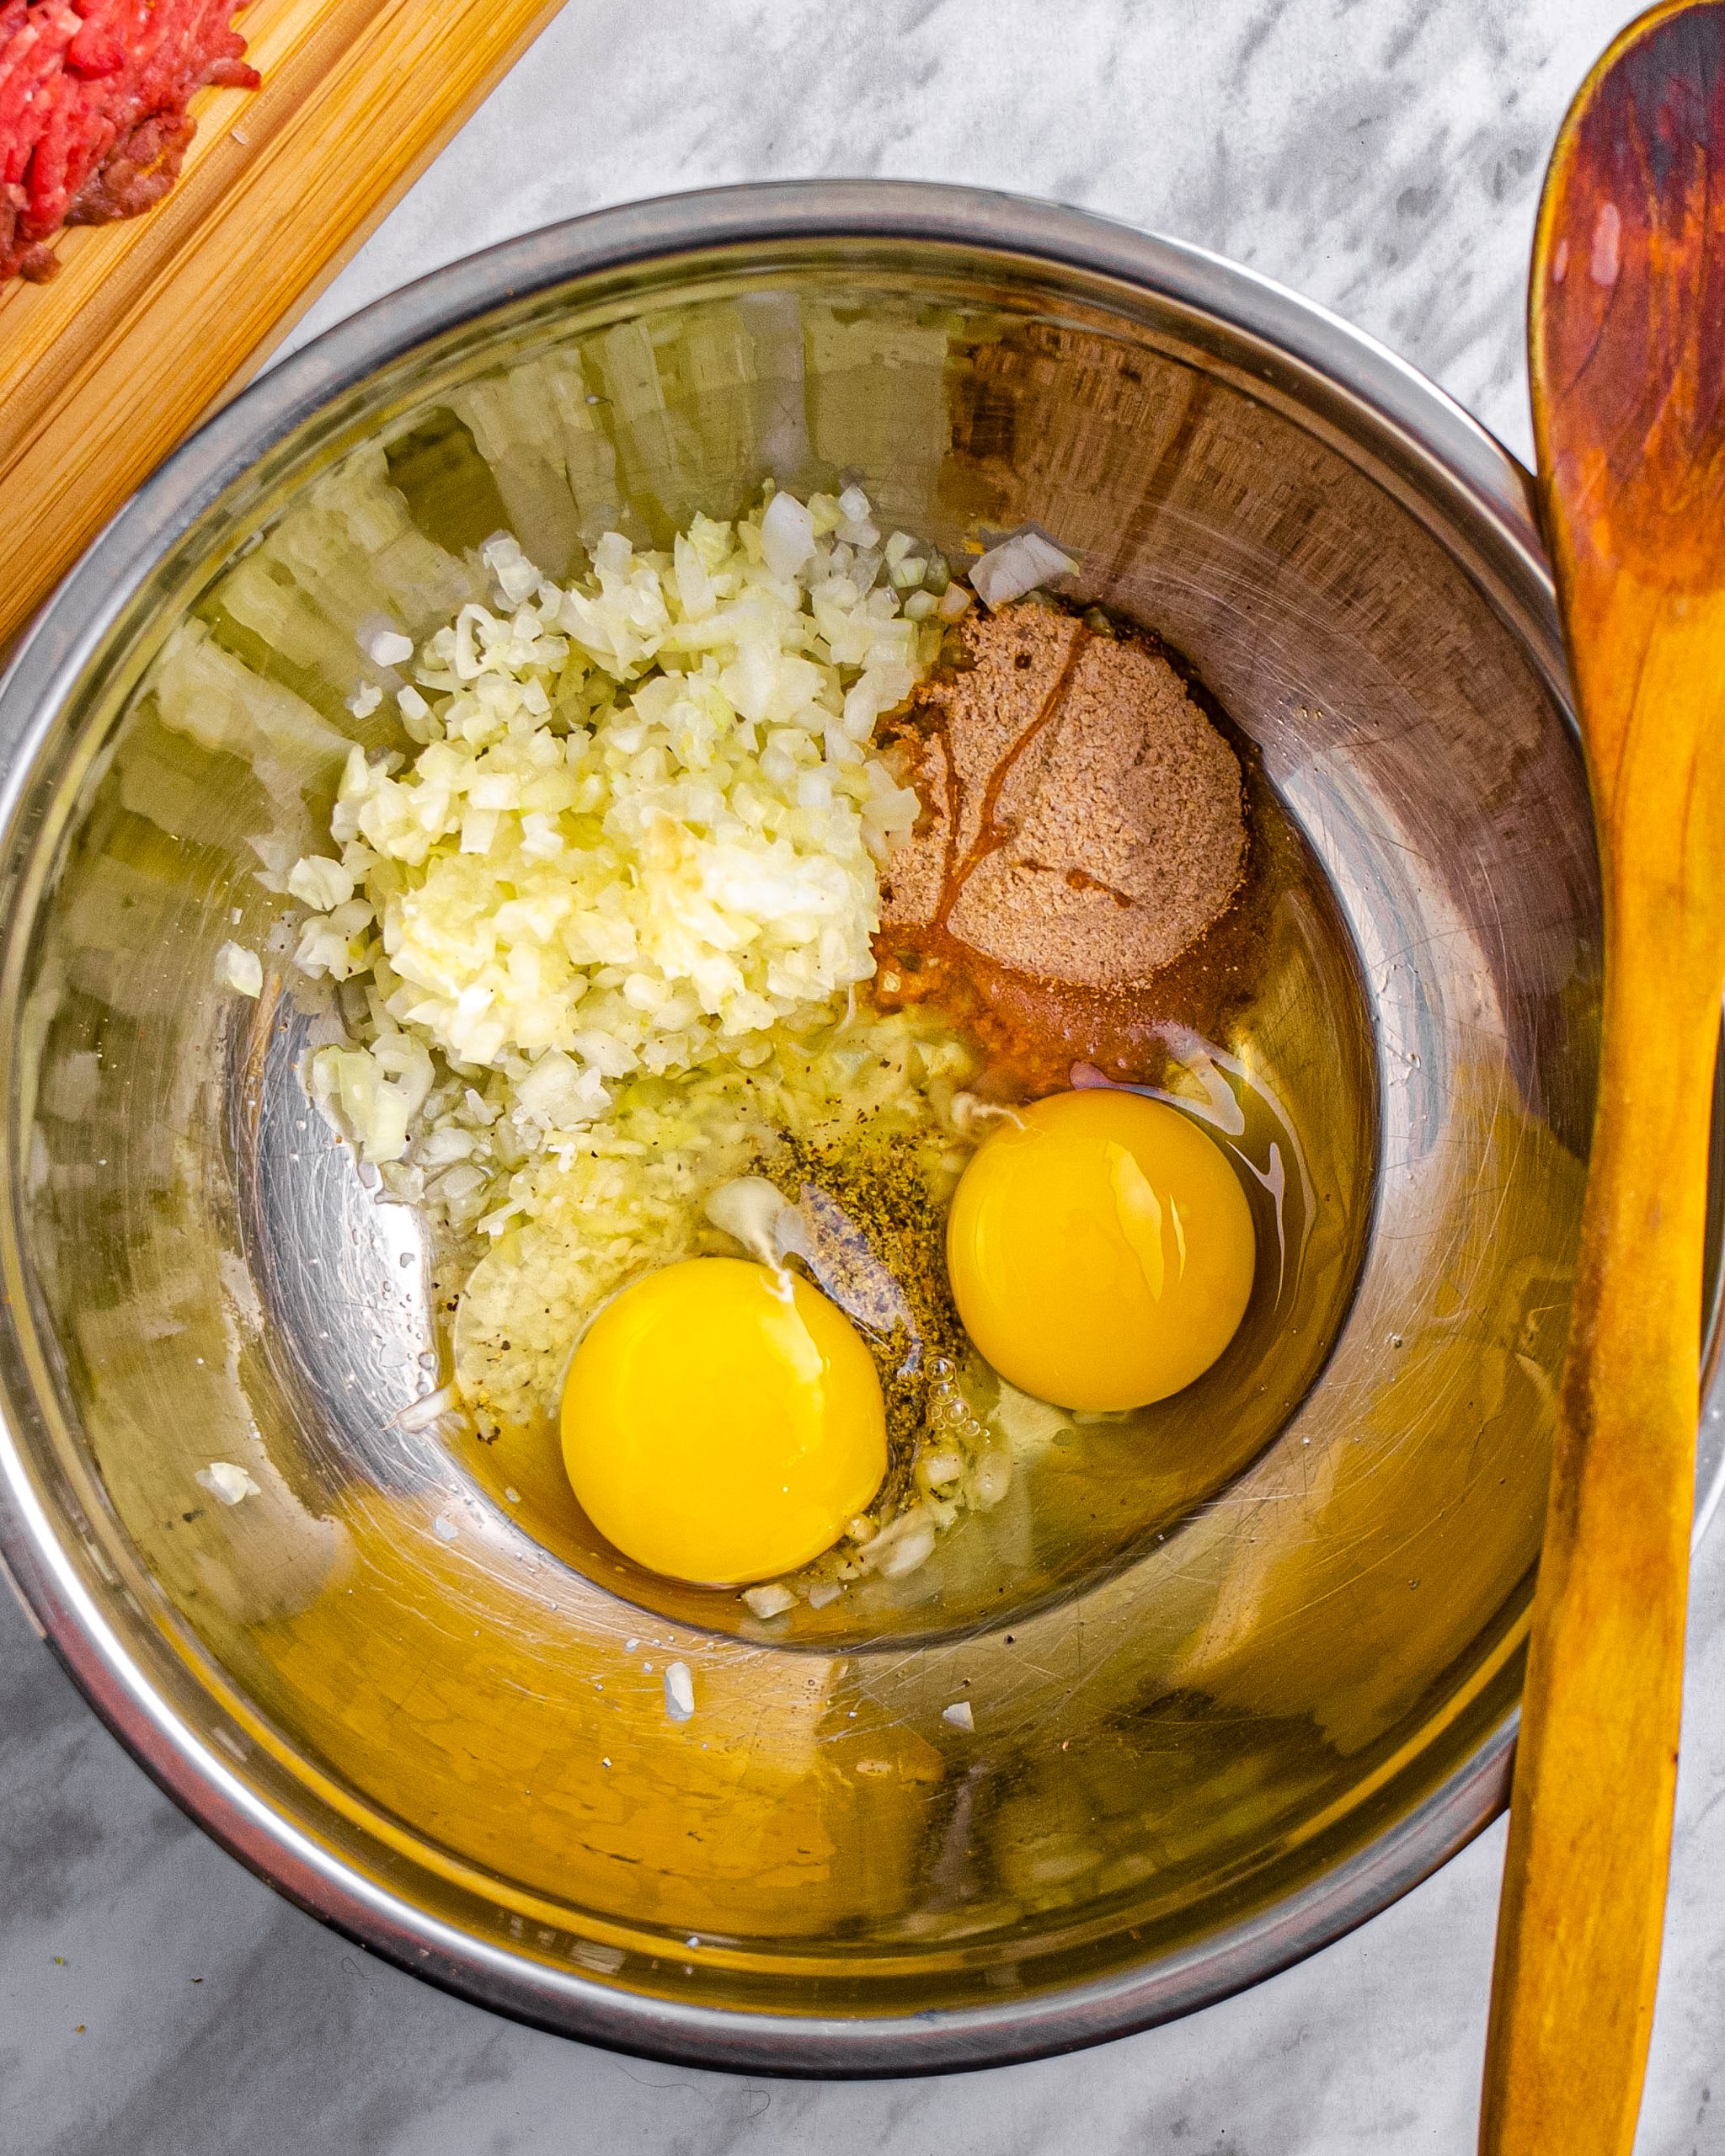 Mix together the eggs, onion, bouillon powder, and salt and pepper to taste in a bowl.